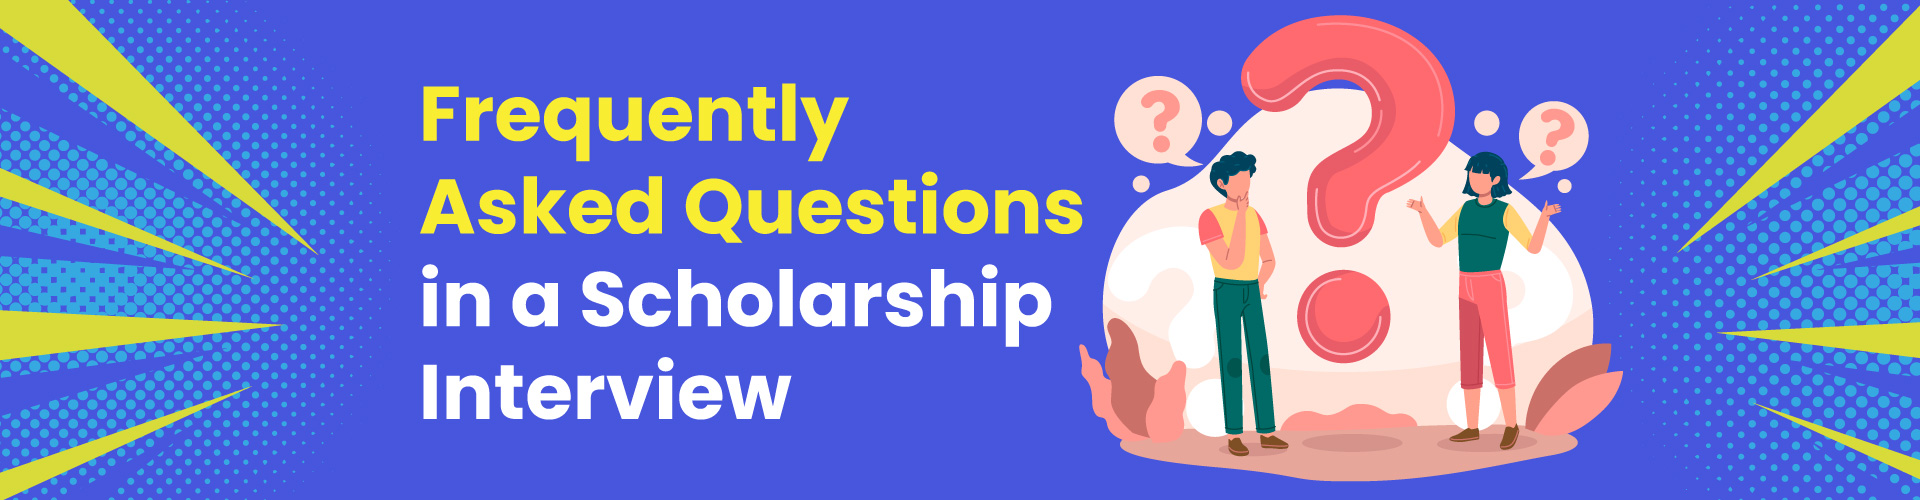 Frequently Asked Questions in a Scholarship Interview